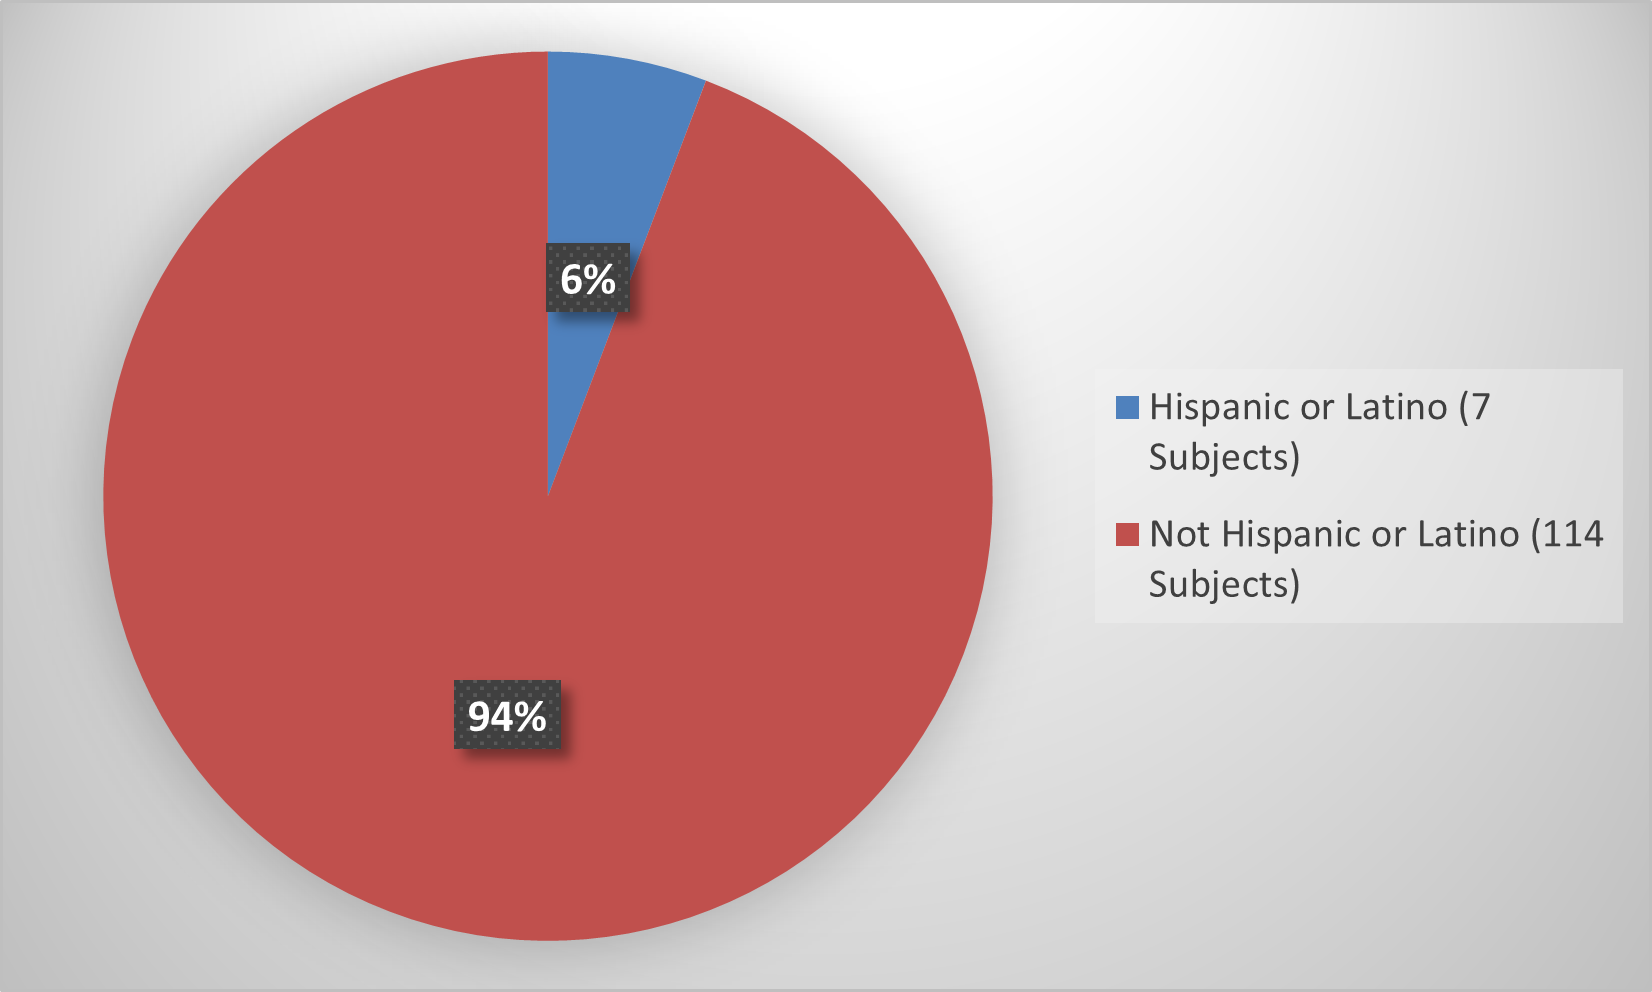 Pie chart summarizing how many hispanics and non-hispanics  were in the clinical trial.  In total, 7(6%) hispanic patients,  and 114(94%) non-hispanic patients participated in the clinical trial.